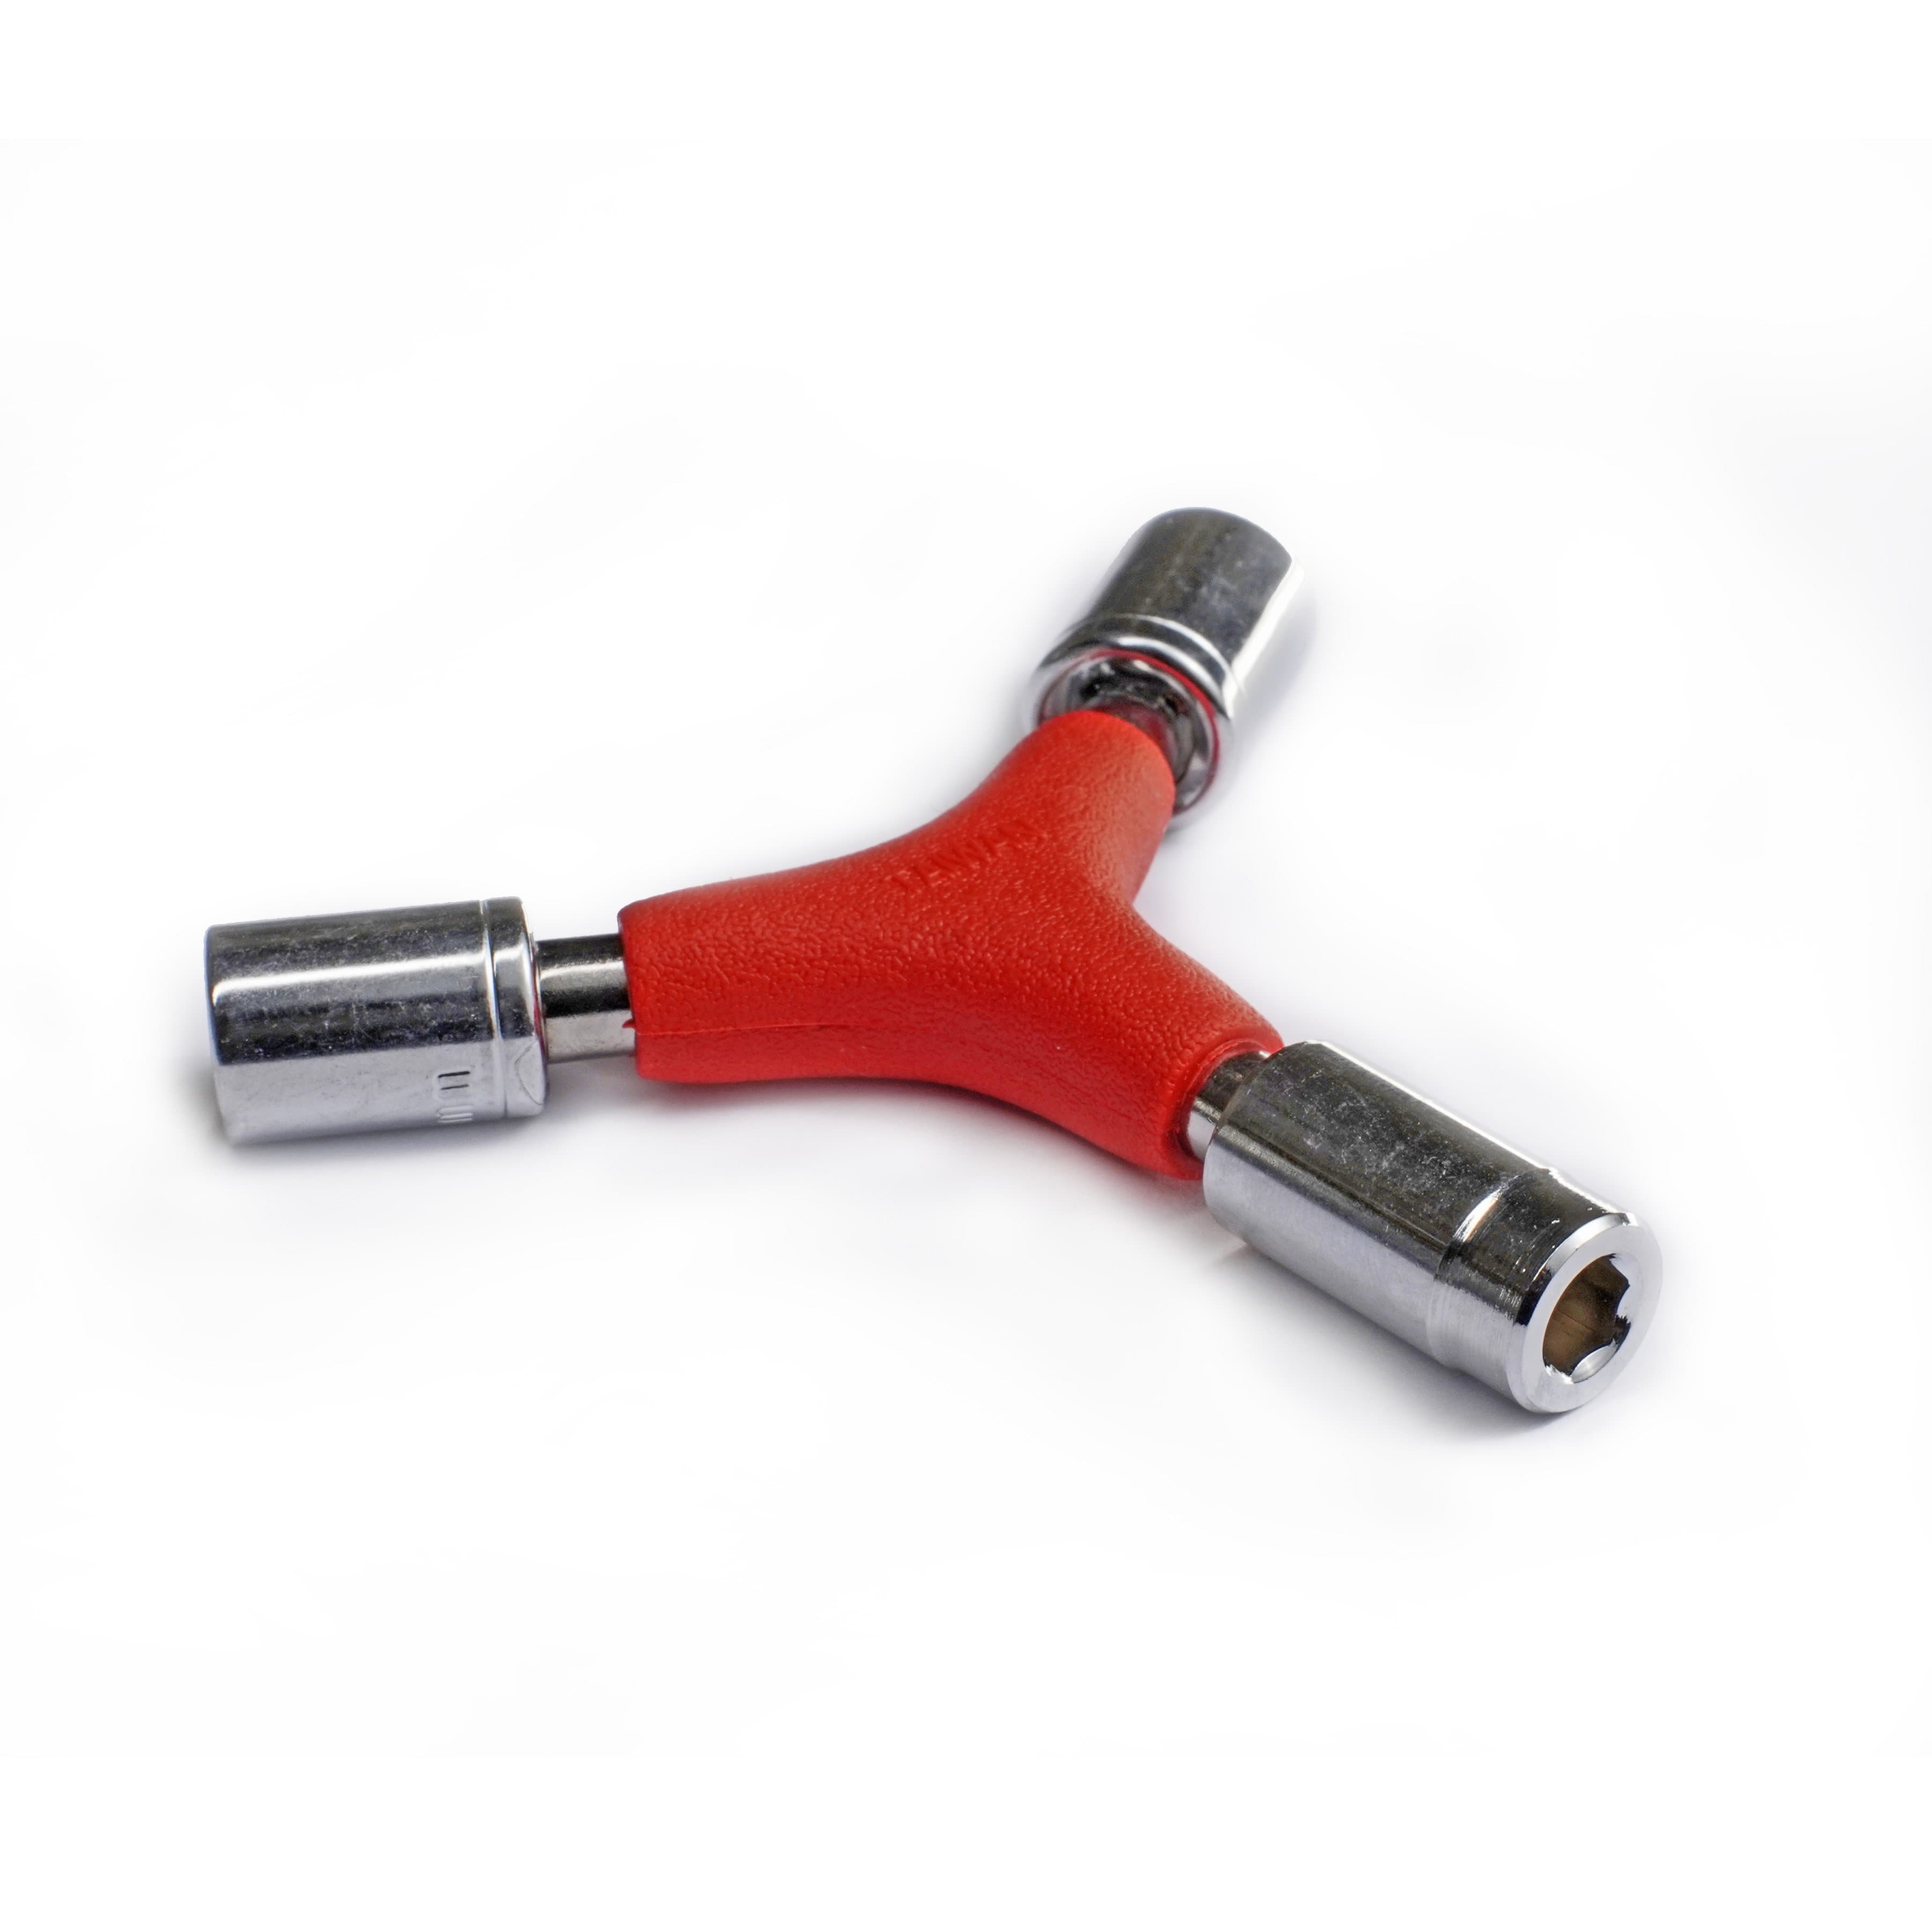 3 Way Mini Wrench 10 mm, 11 mm,  Socket With Magnetic Bit Holder